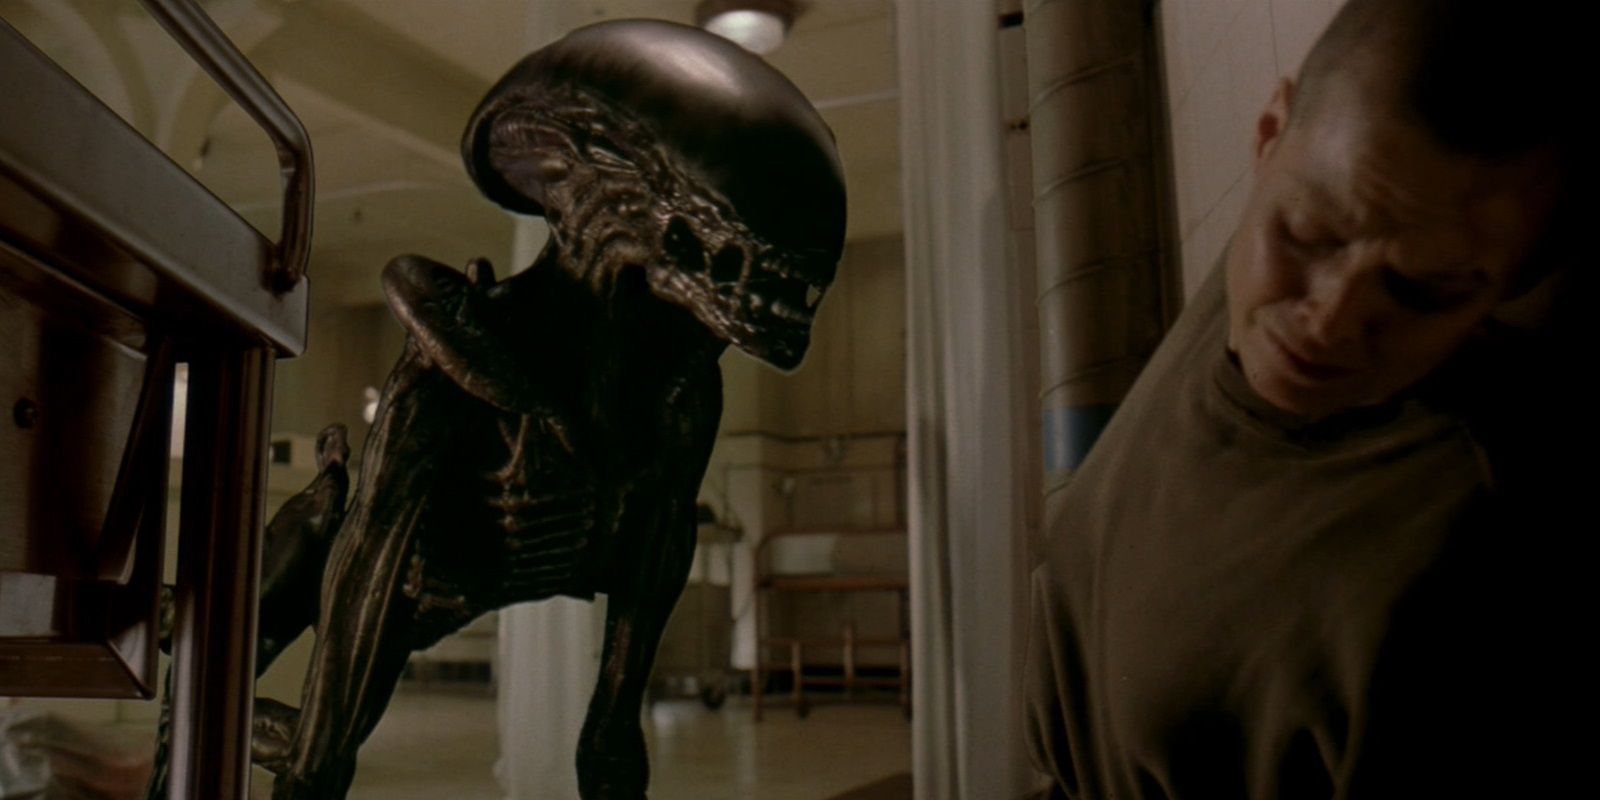 The Dragon confronts Ripley in Alien 3